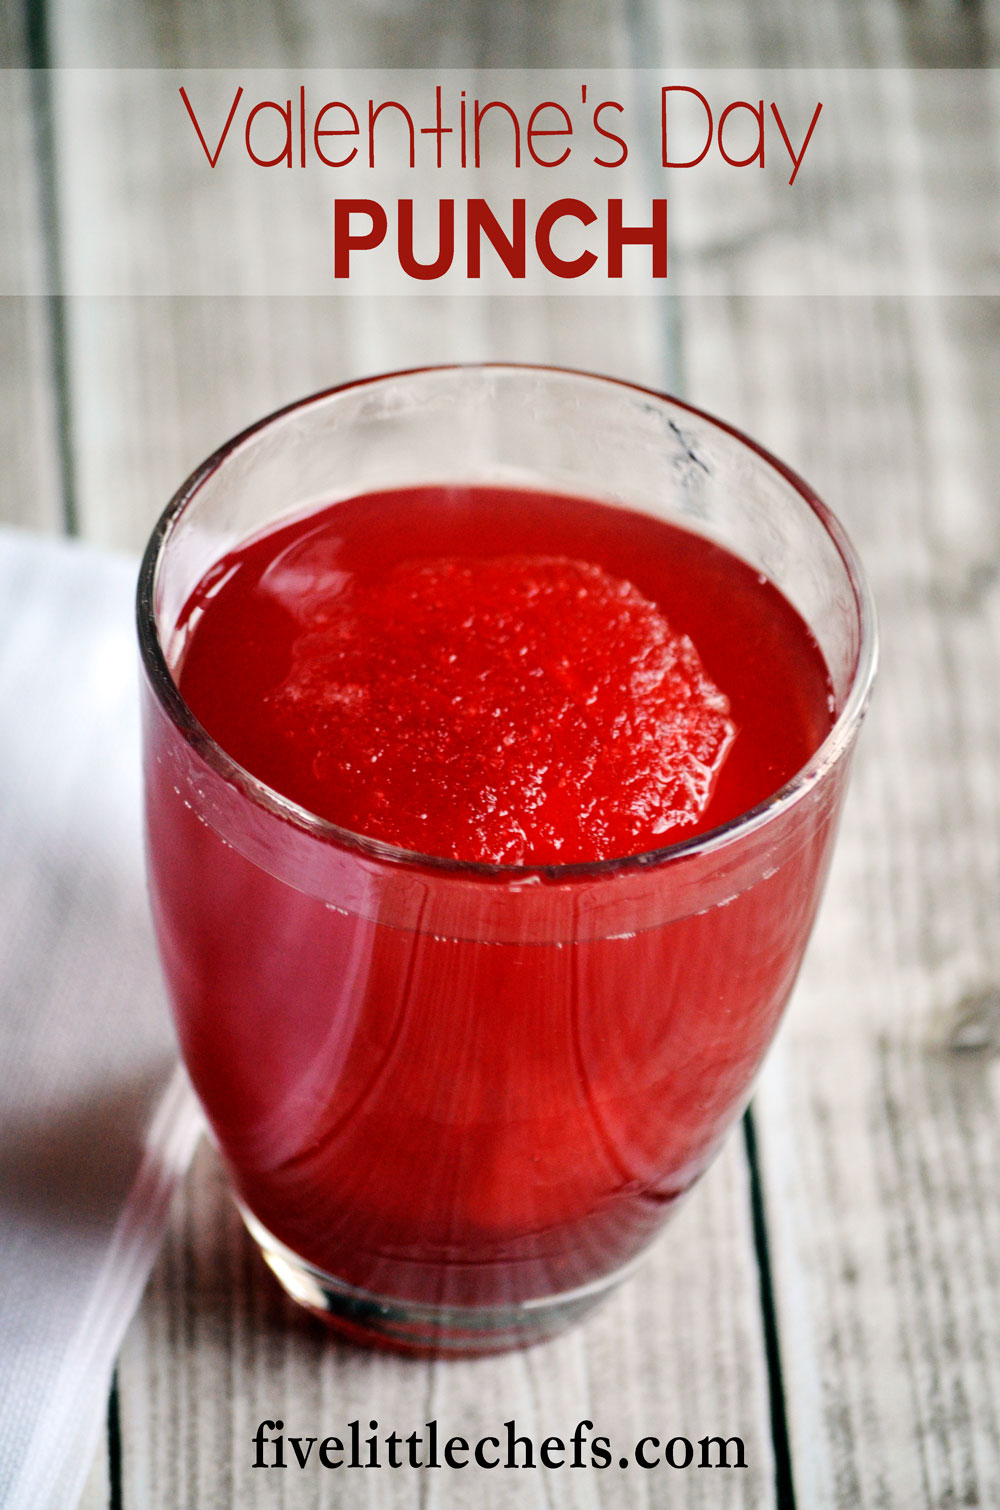 Don't forget a special Valentine's Day Punch to go along with your Valentine's Day meal. This red drink needs to be put together the night before to freeze. An hour before your special dinner thaw the frozen part and then combine it with soda. I love simple recipes like this. 